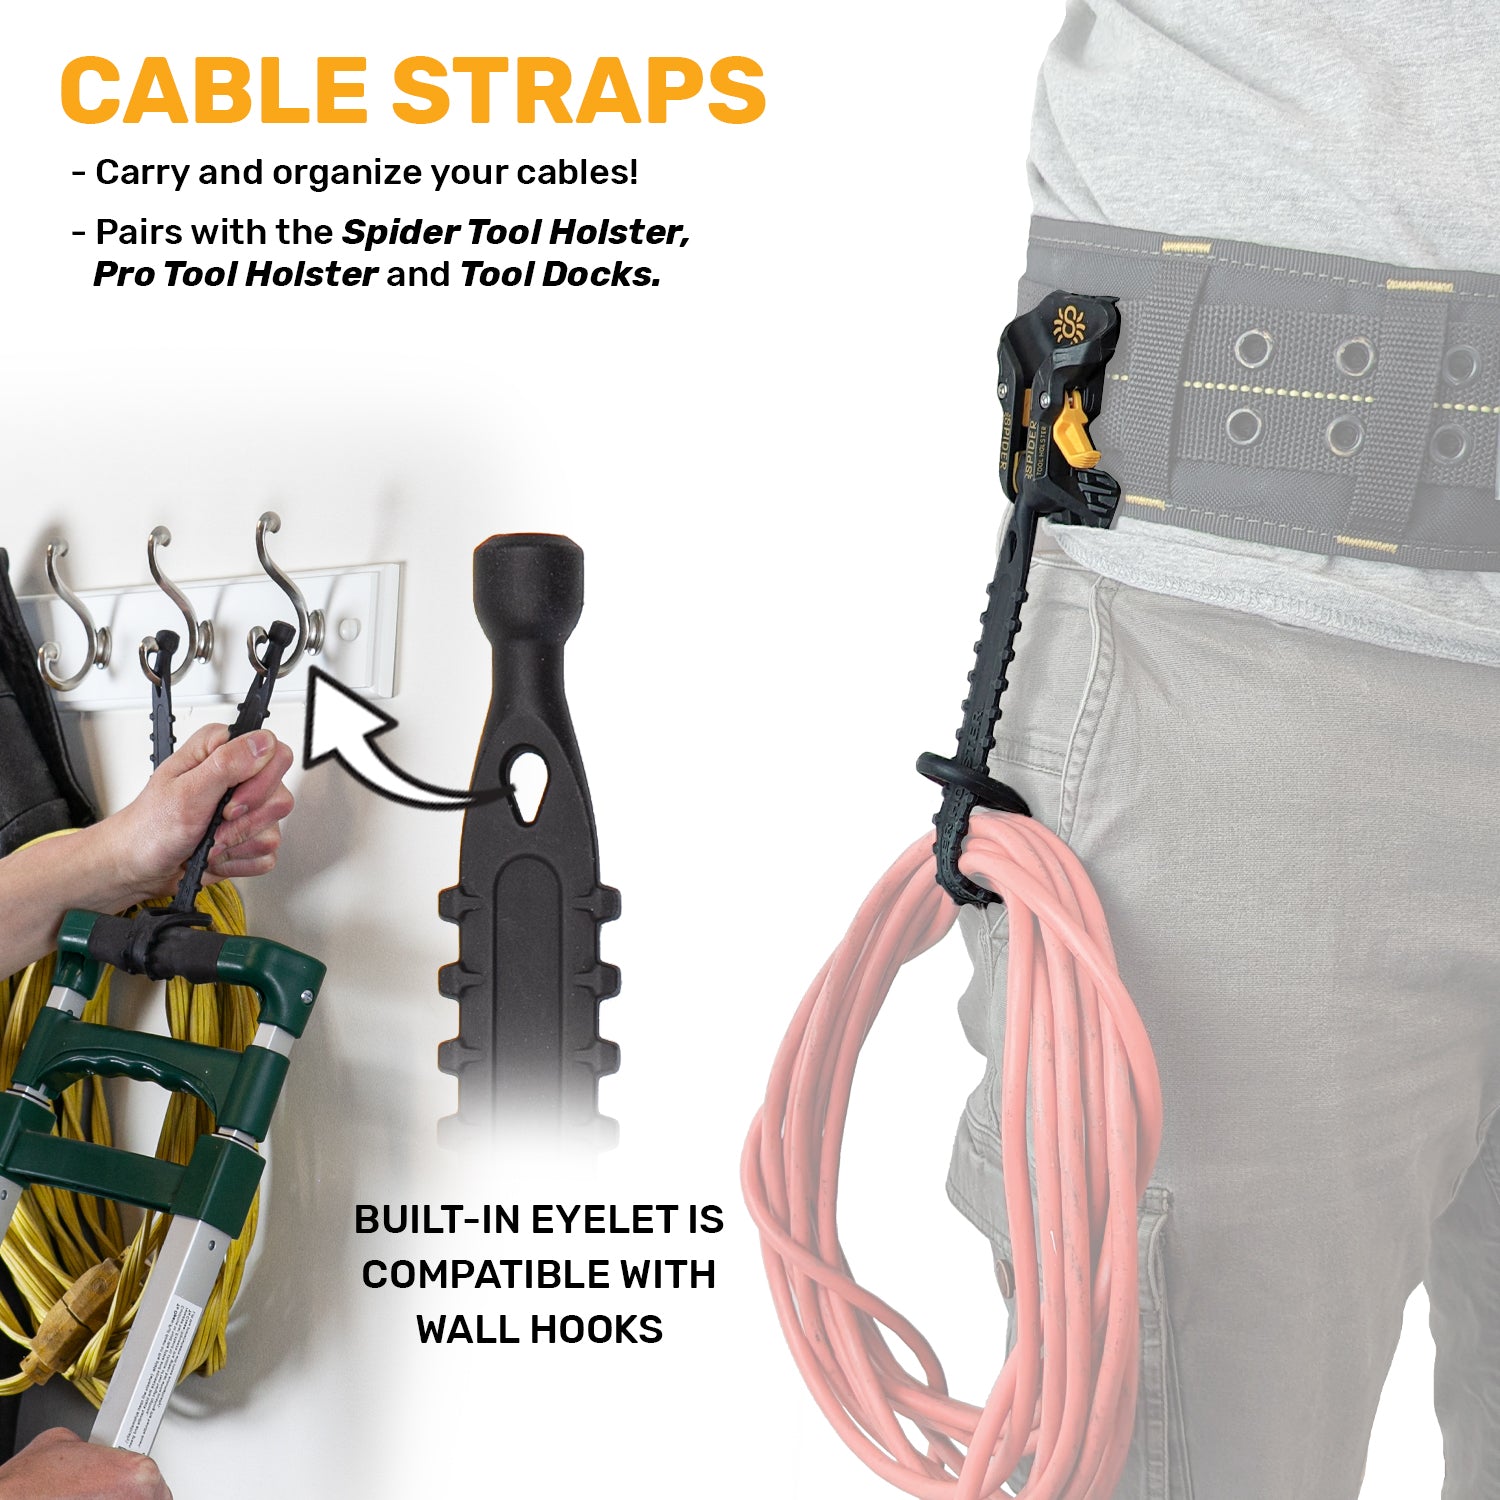 5042TH: Bundle - 2 Tool Docks + 2 Cable Straps